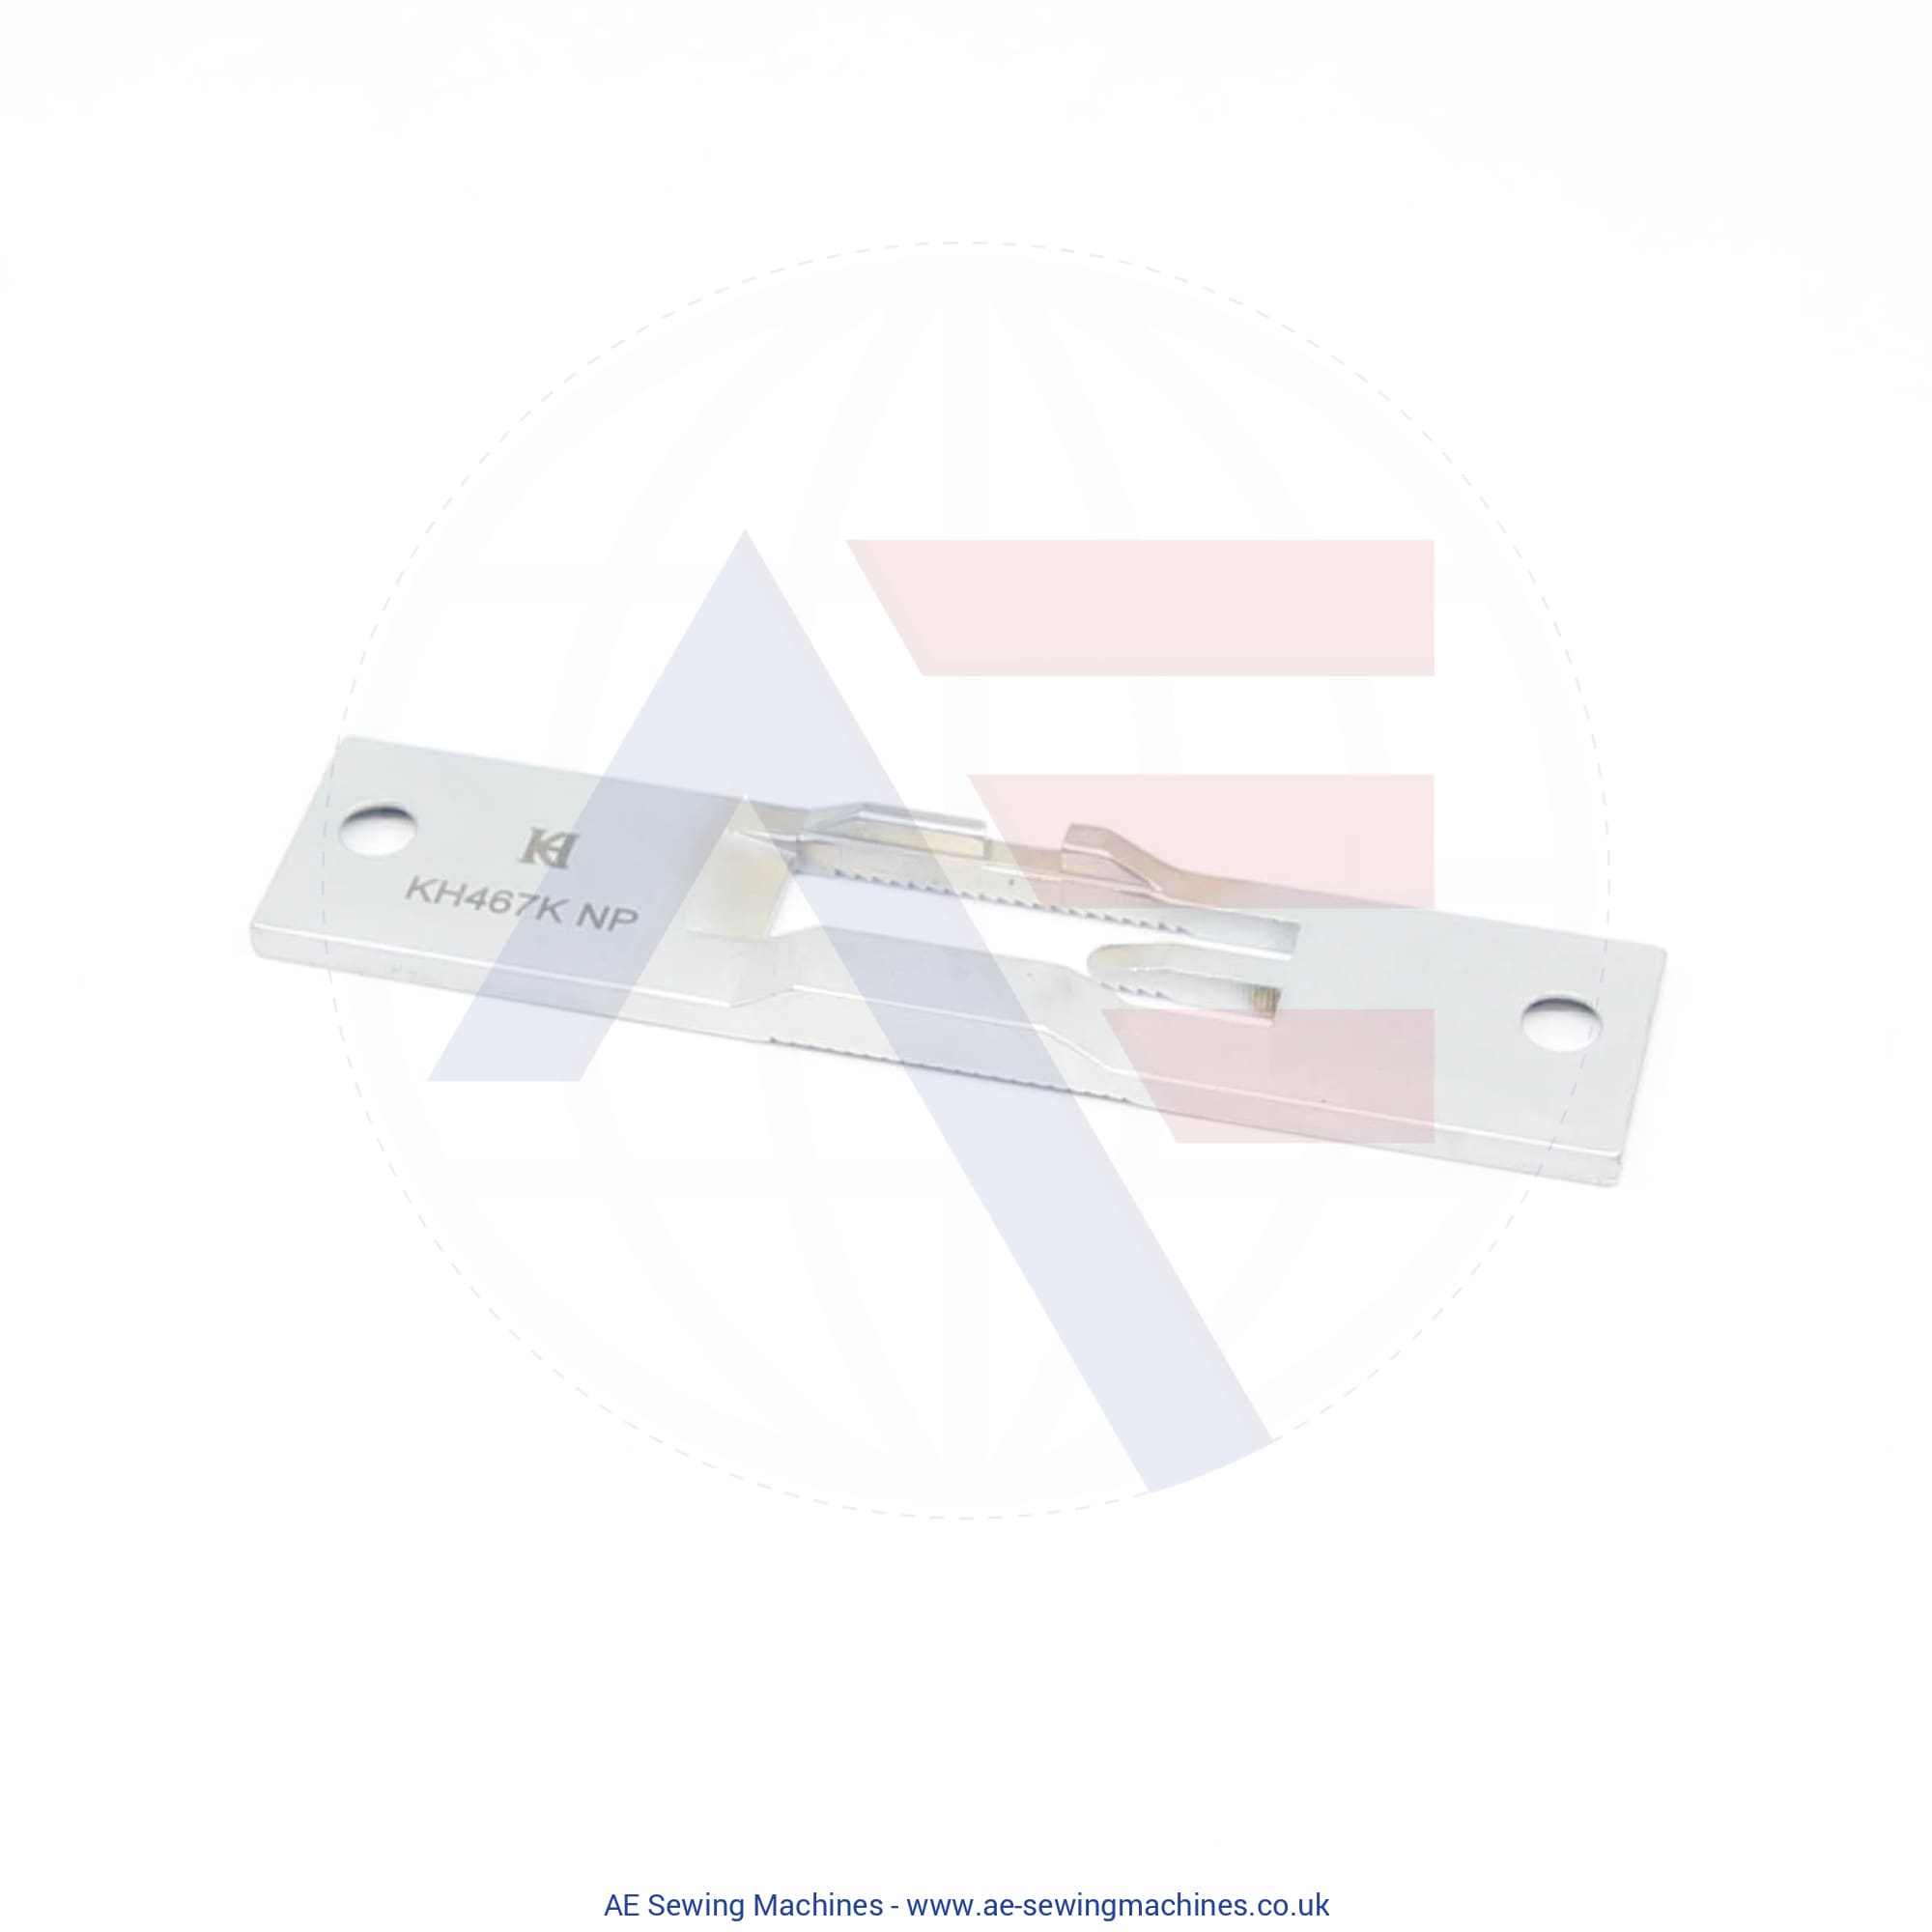 Kh467Knp Needle Plate